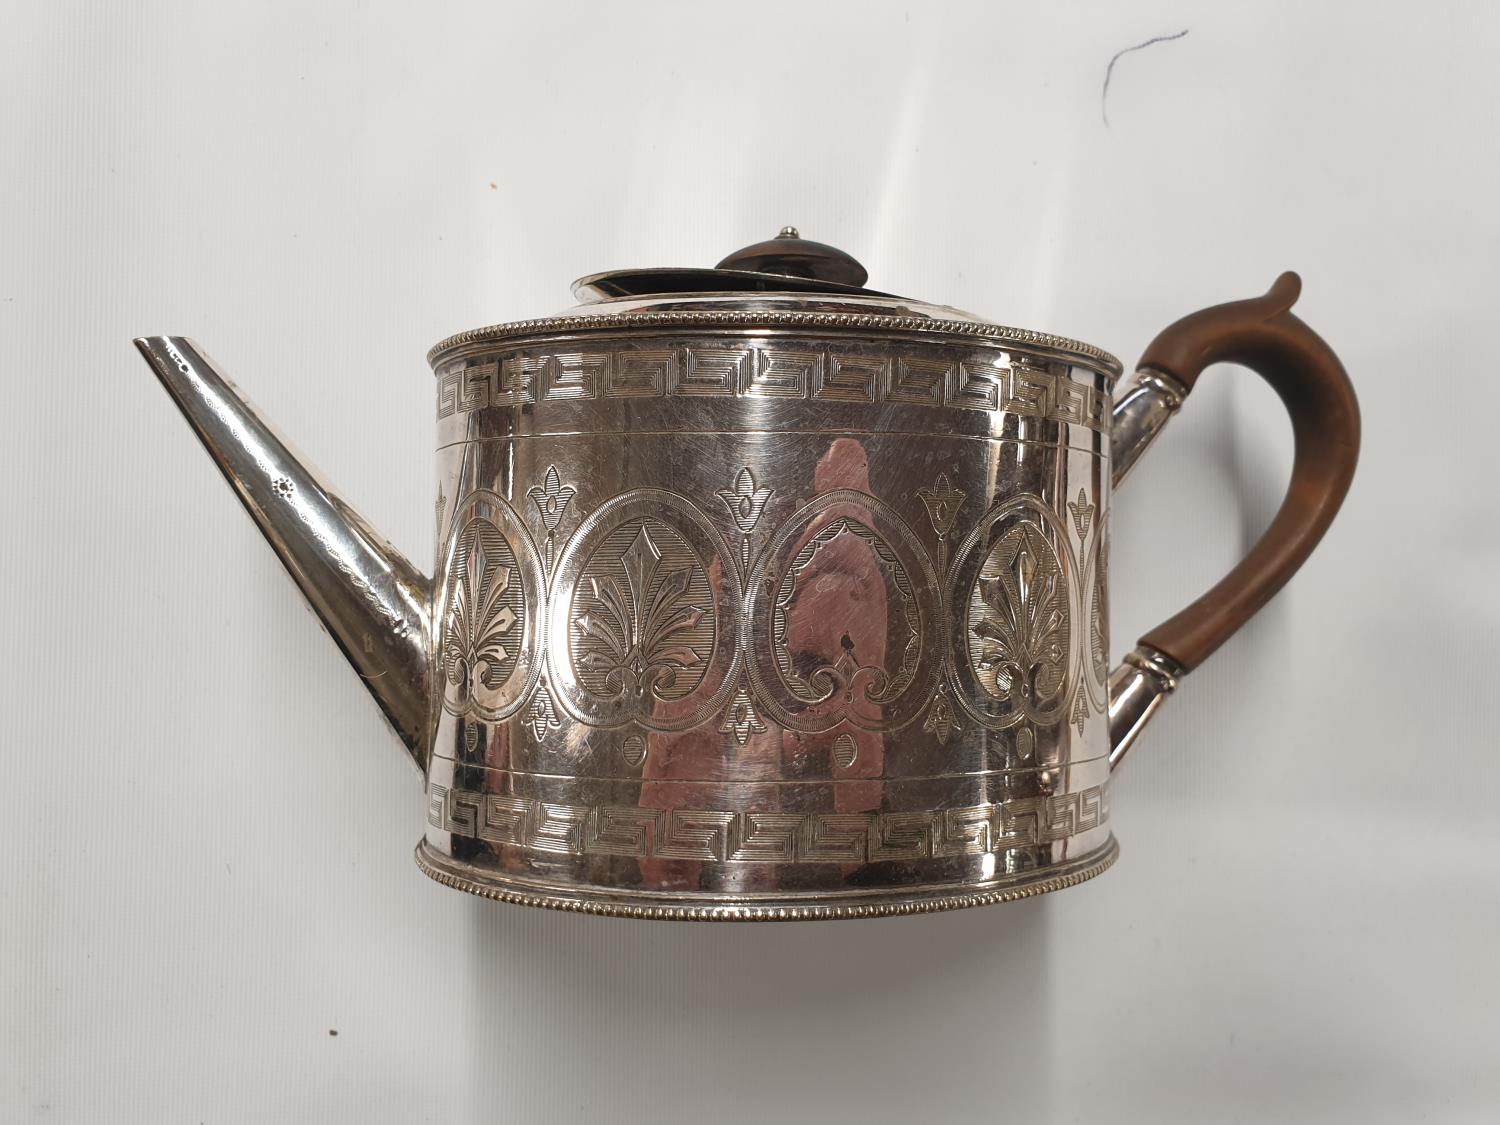 A lovely 19th Century silver plated Tea set with greek key design by Waterhouse Dublin. - Image 2 of 5